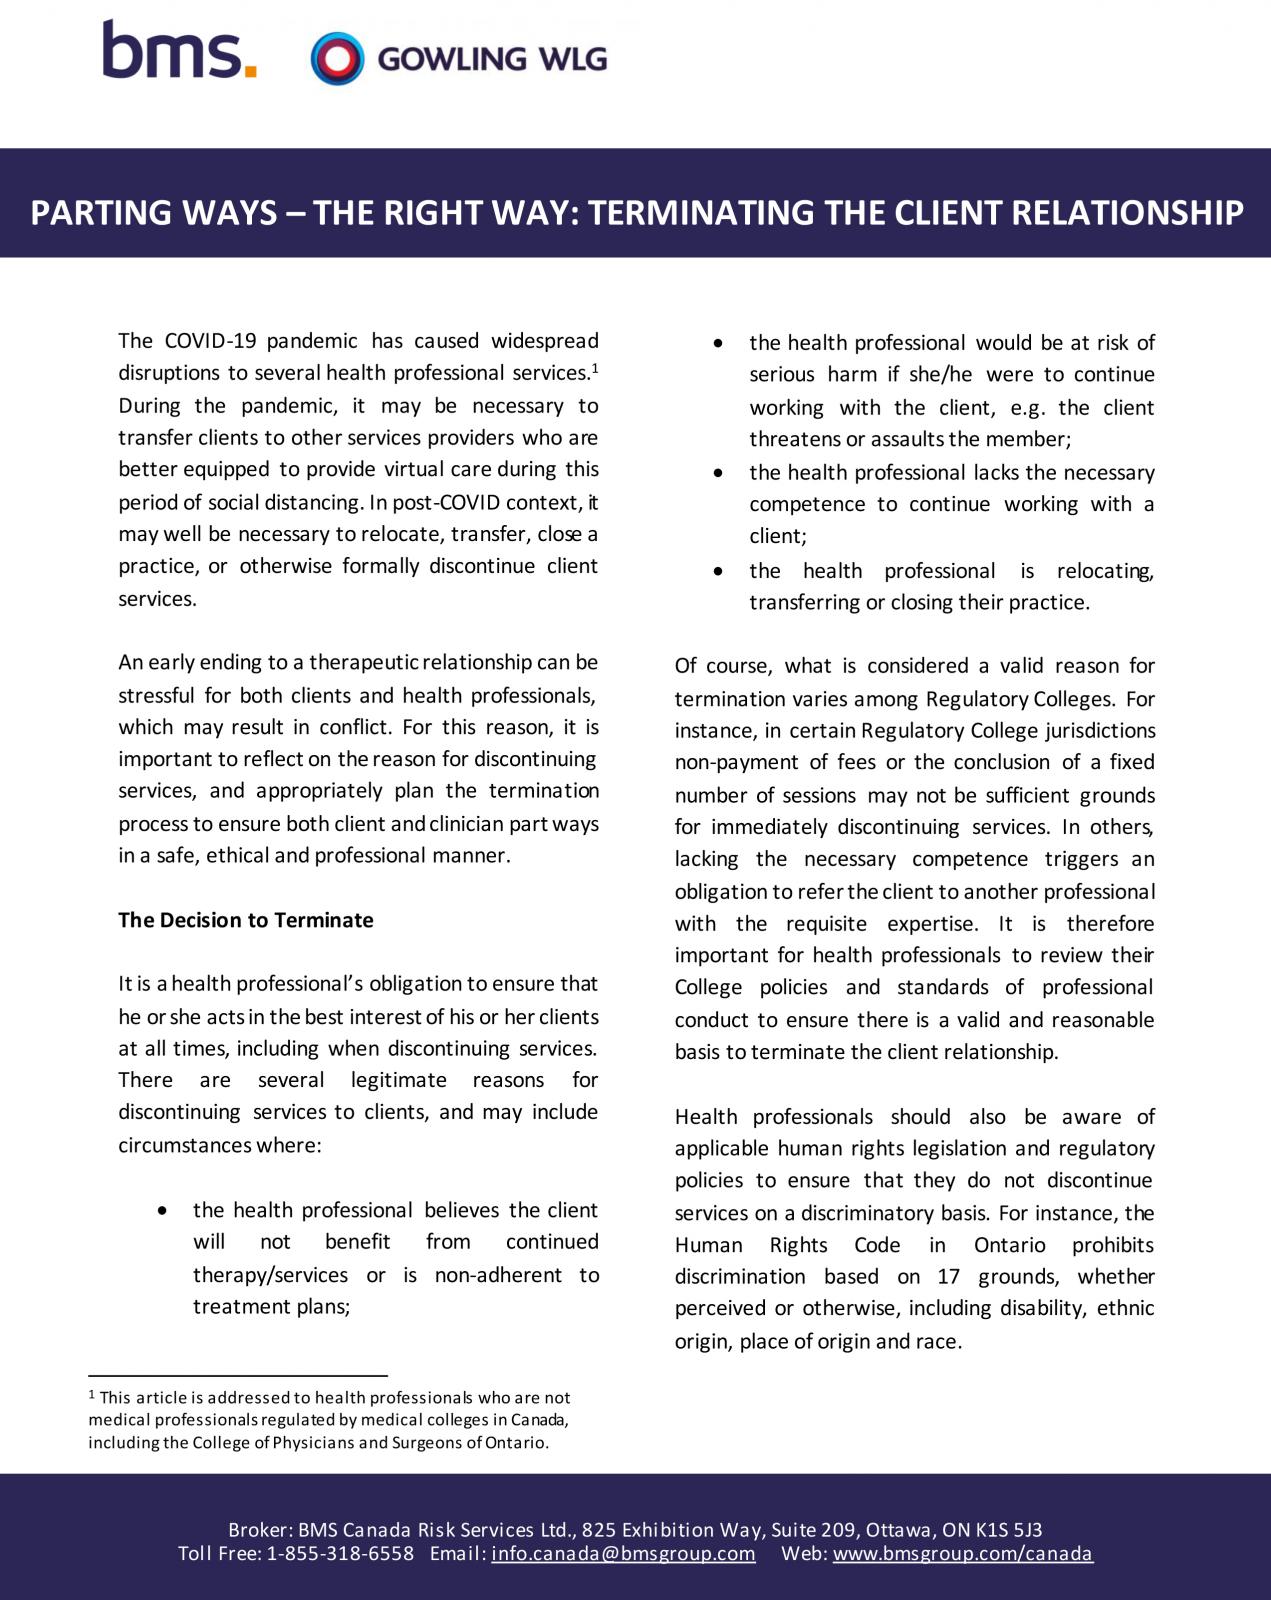 PARTING WAYS – THE RIGHT WAY: TERMINATING THE CLIENT RELATIONSHIP